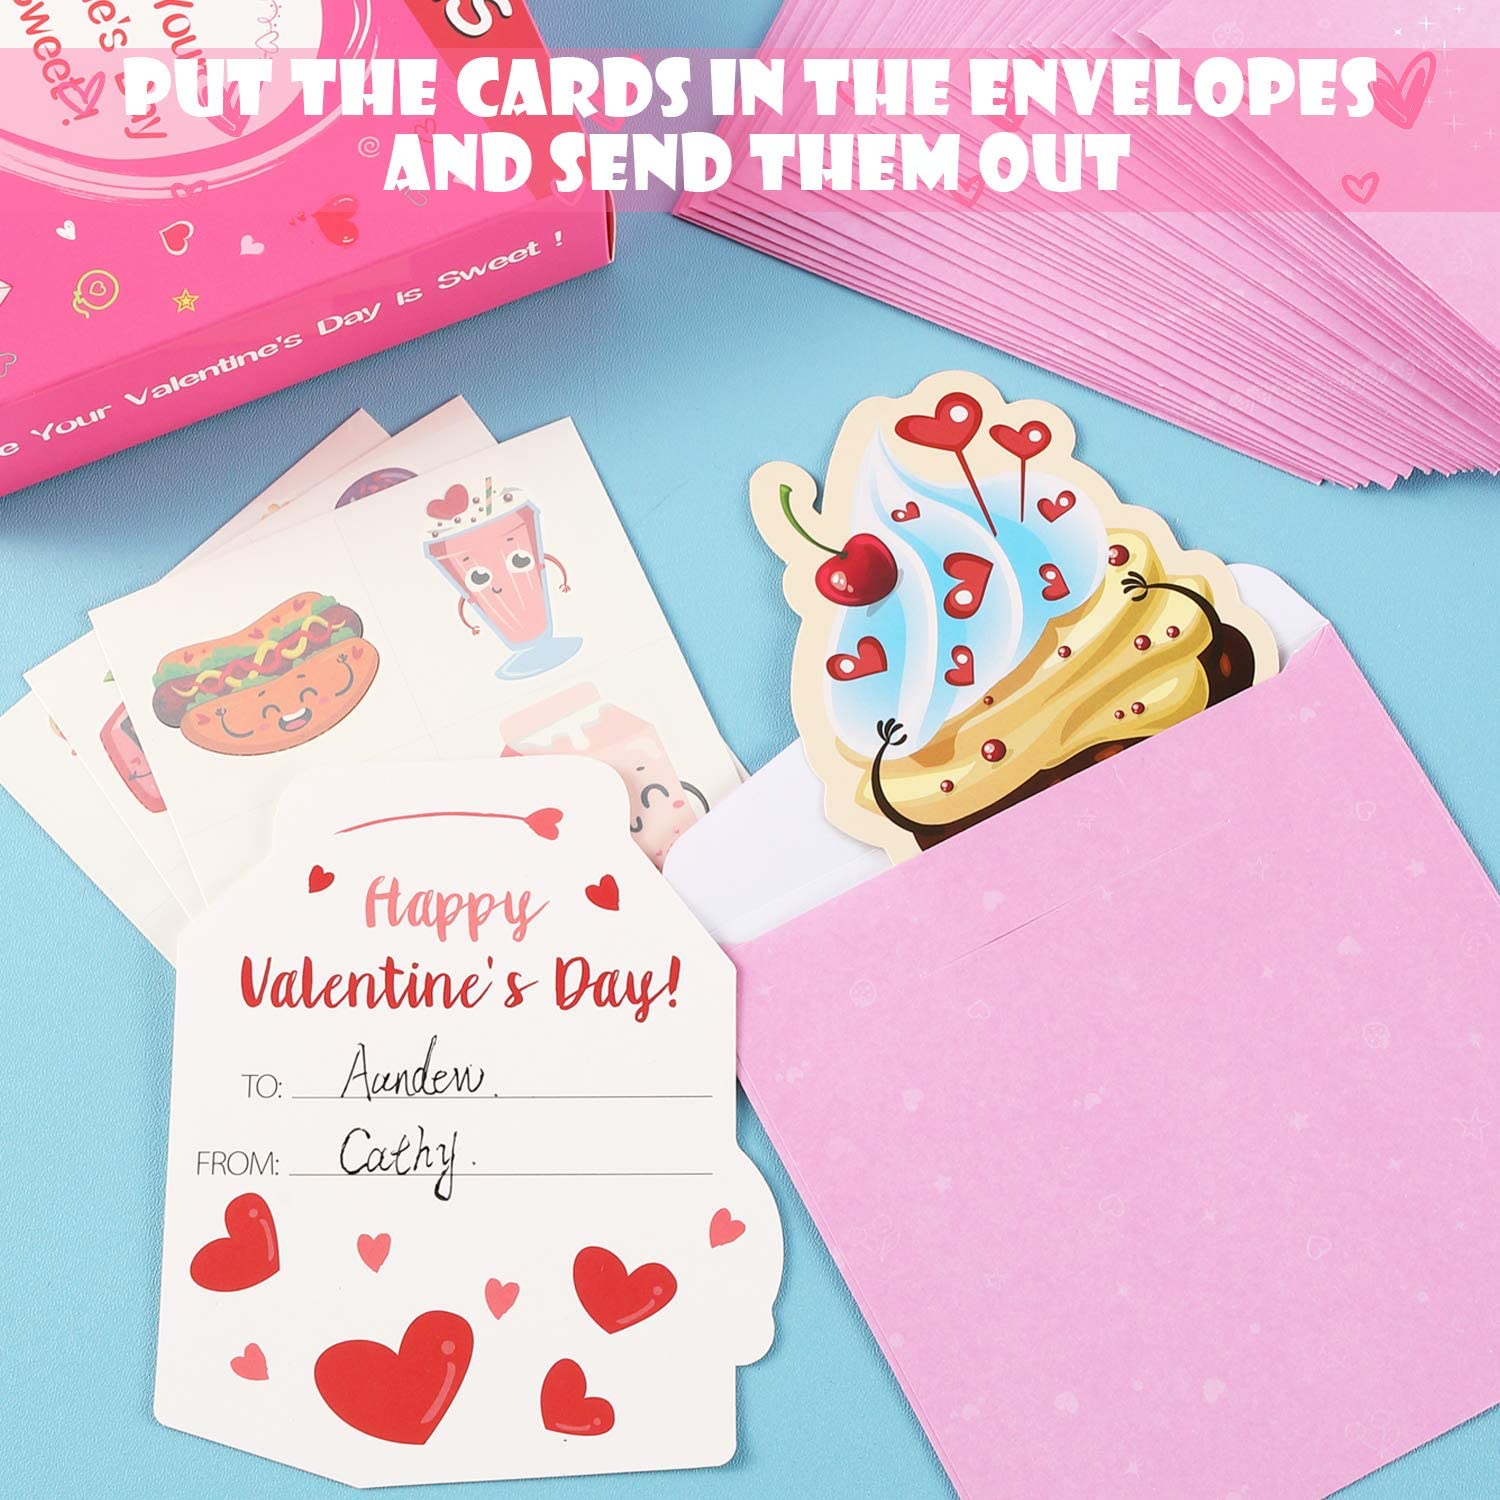 AOJOYS Valentines Day Cards for Kids, 36 Pack Kids Valentines Day Cards with Cute Temporary Tattoos, Pink Envelopes & 80PCS Stickers, Valentines Cards for Classroom Exchange